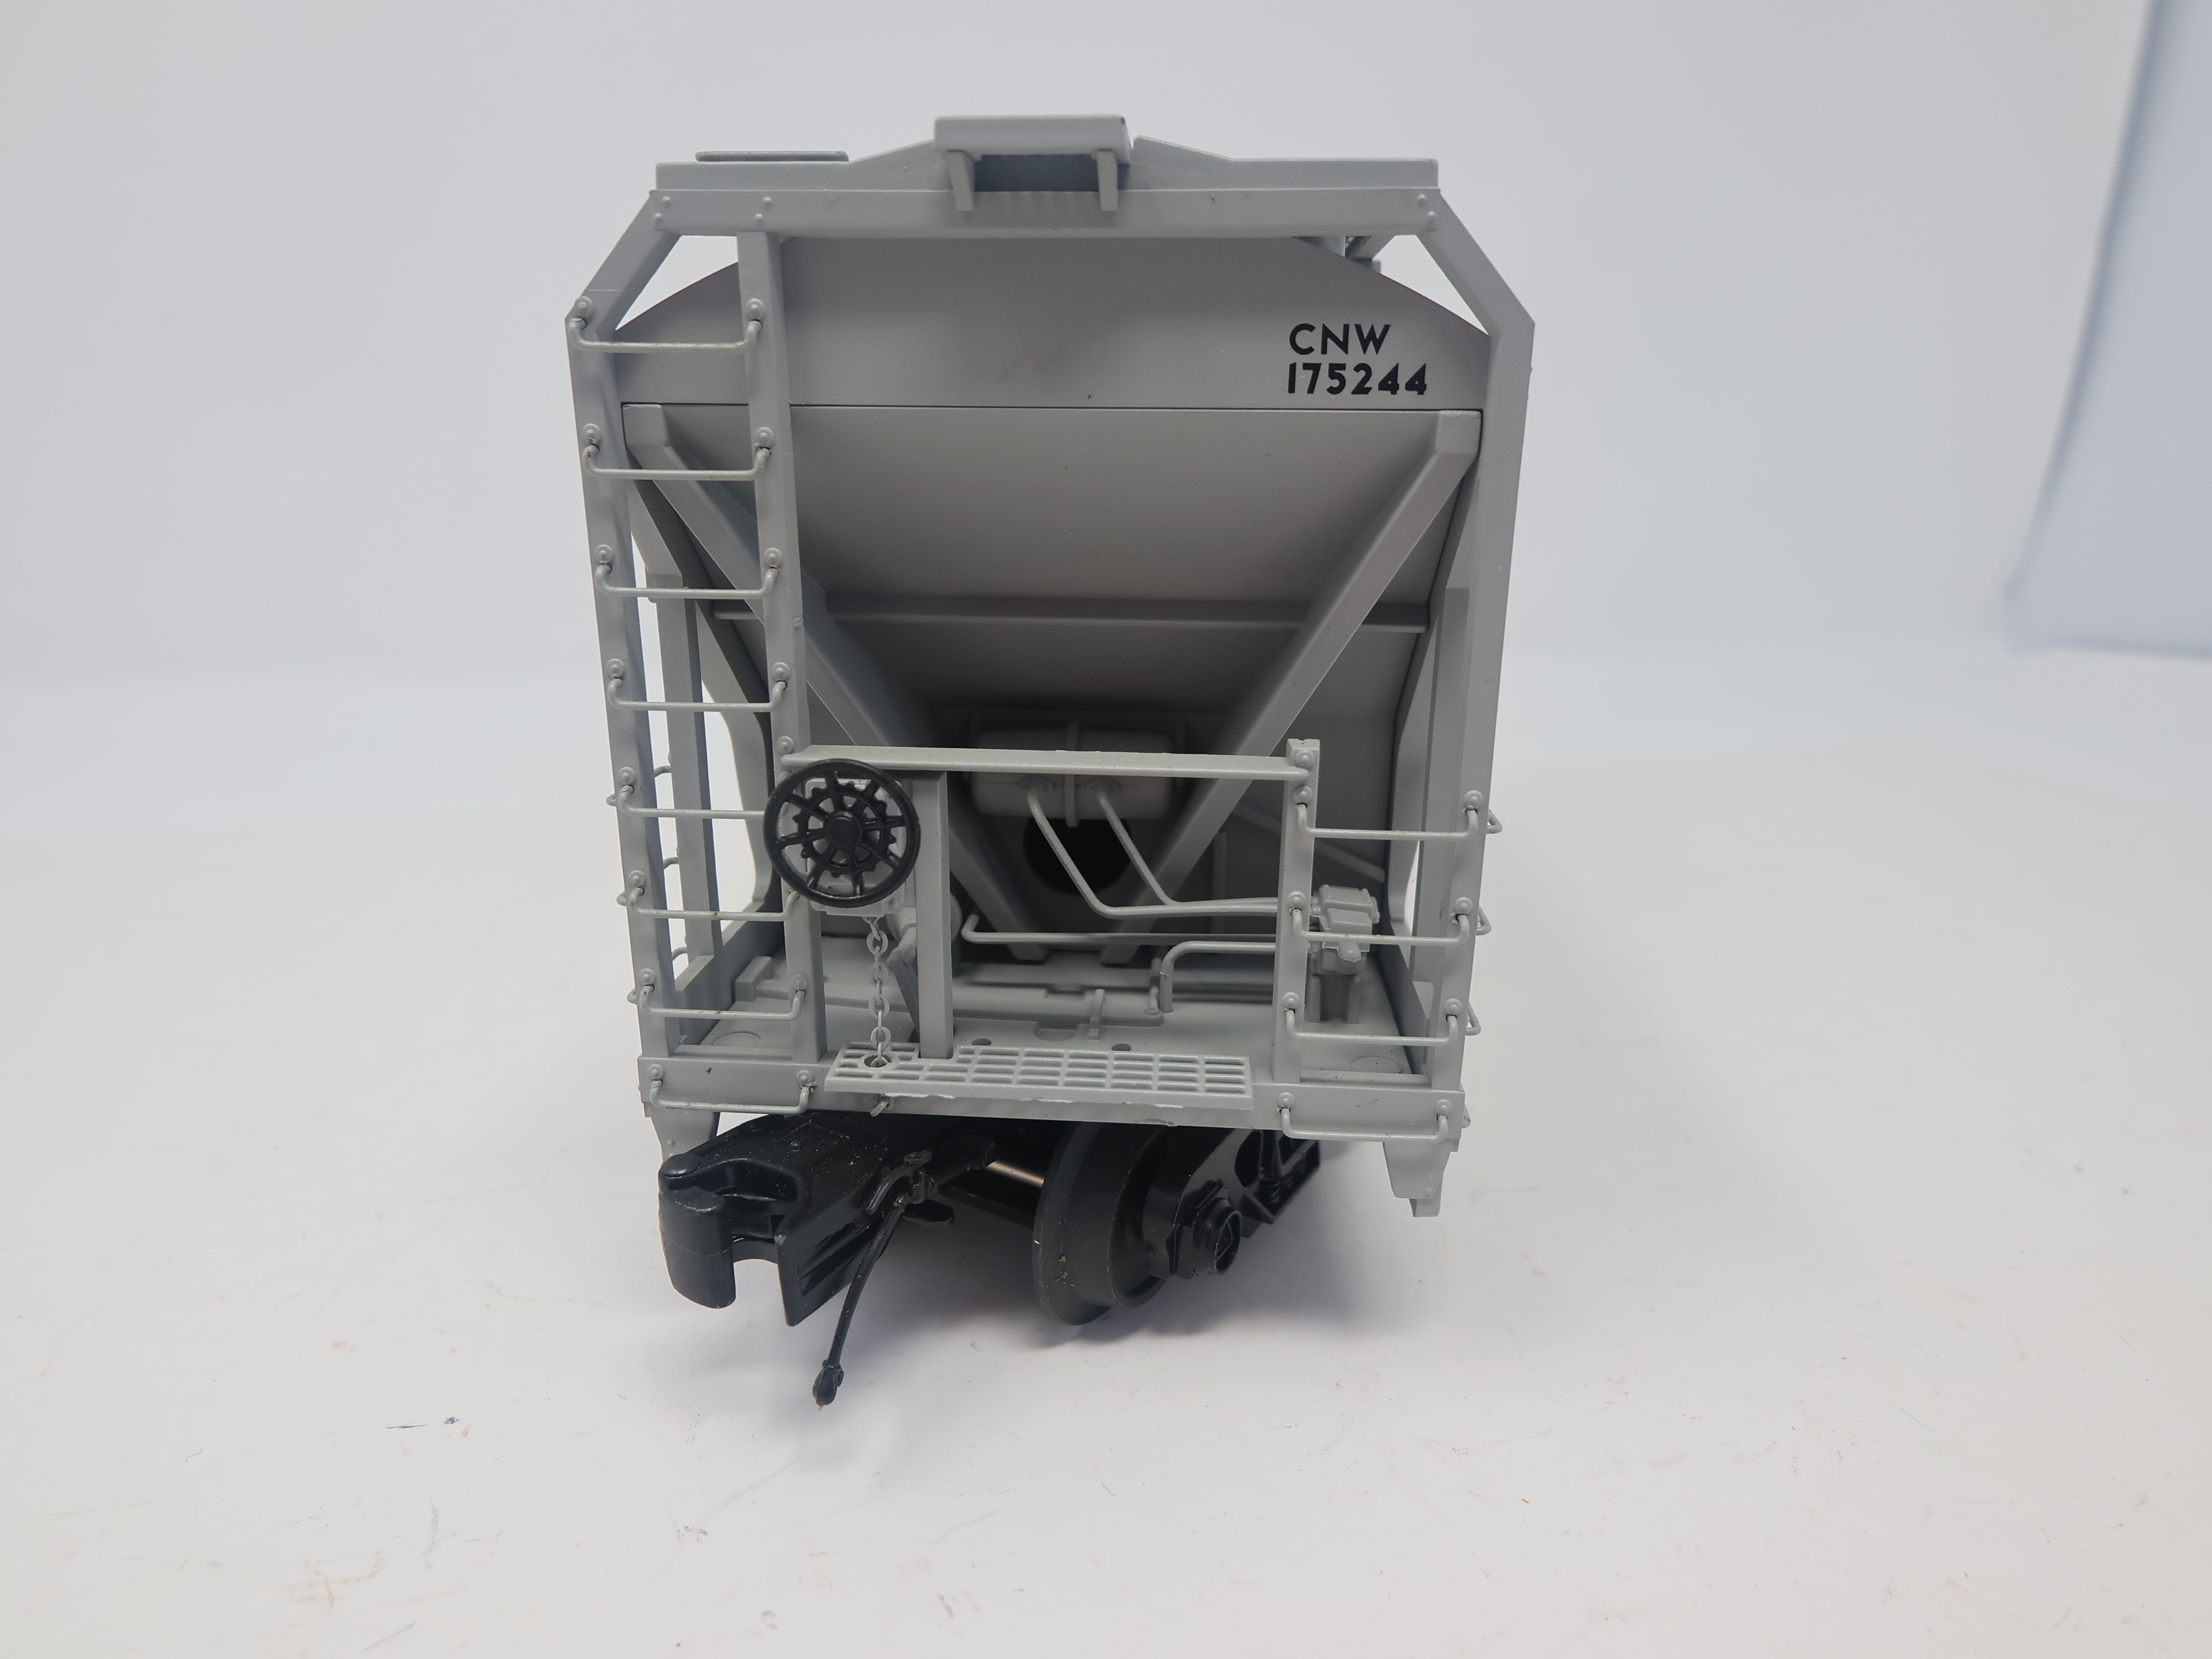 USED MTH Premier 20-97648 O, 2 Bay Centerflow Hopper Union Pacific Heritage Series, Chicago & North Western CNW #175244